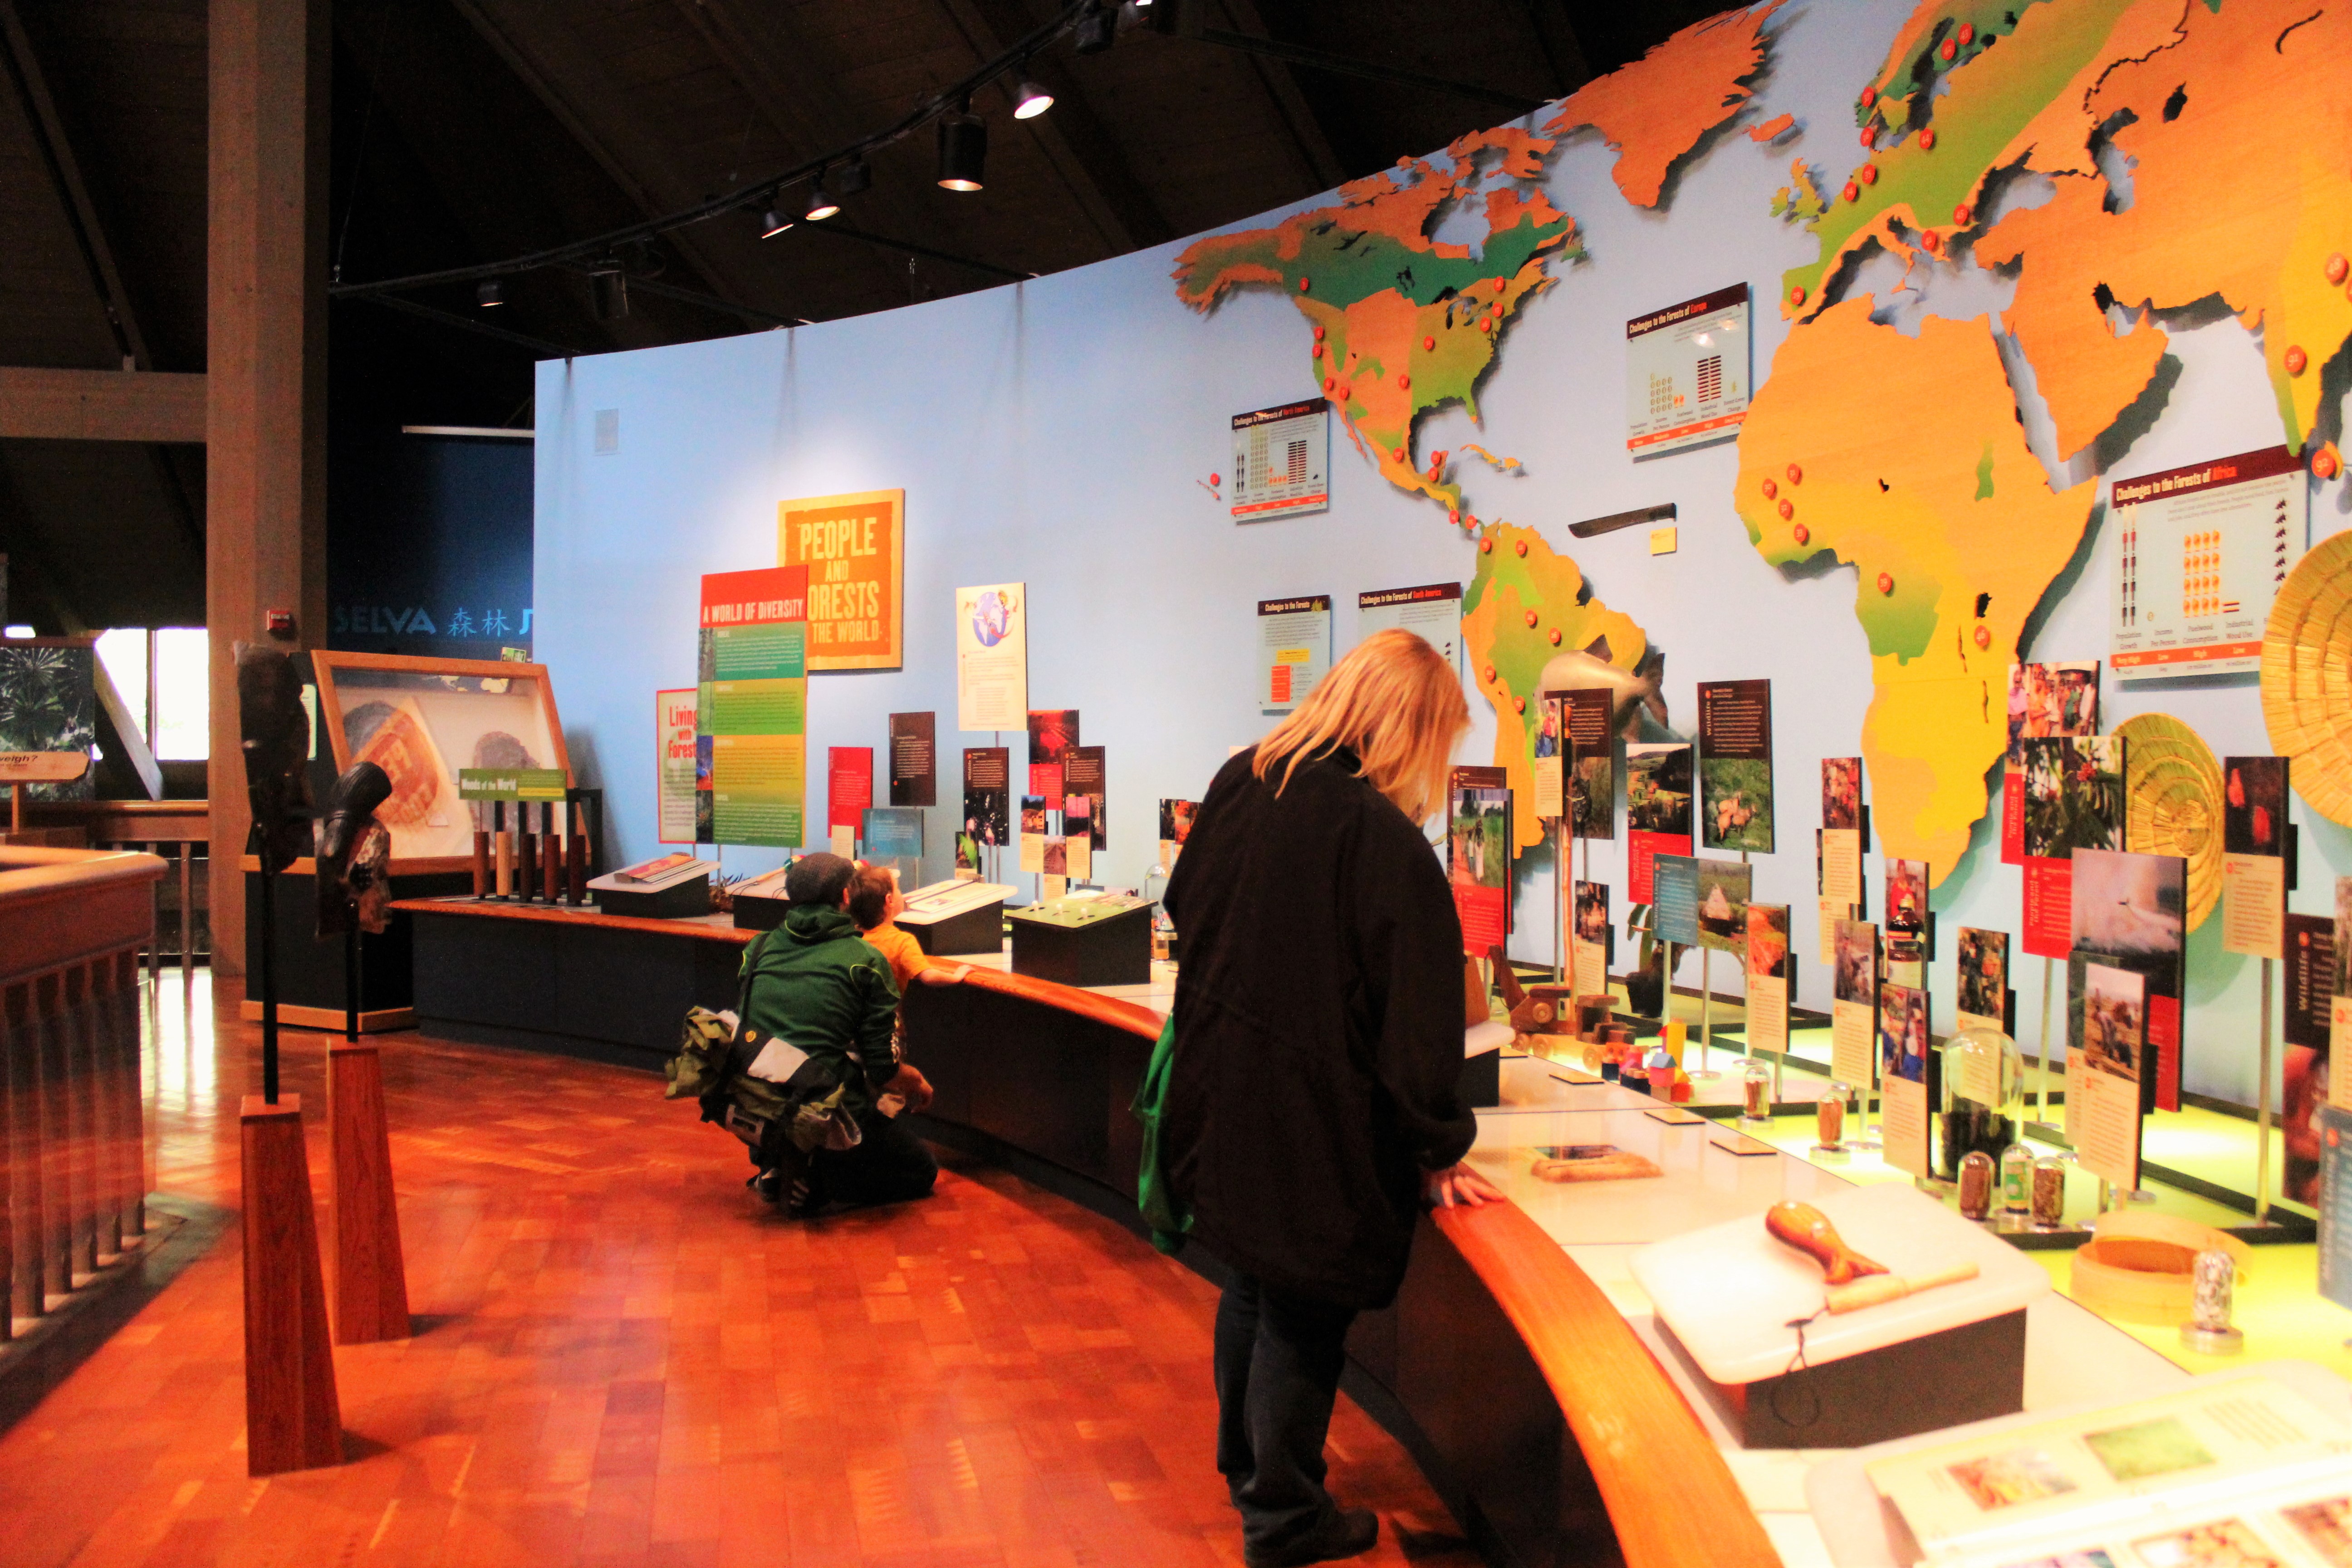 Exhibit at the World Forestry Center, photo by Carrie Uffindell